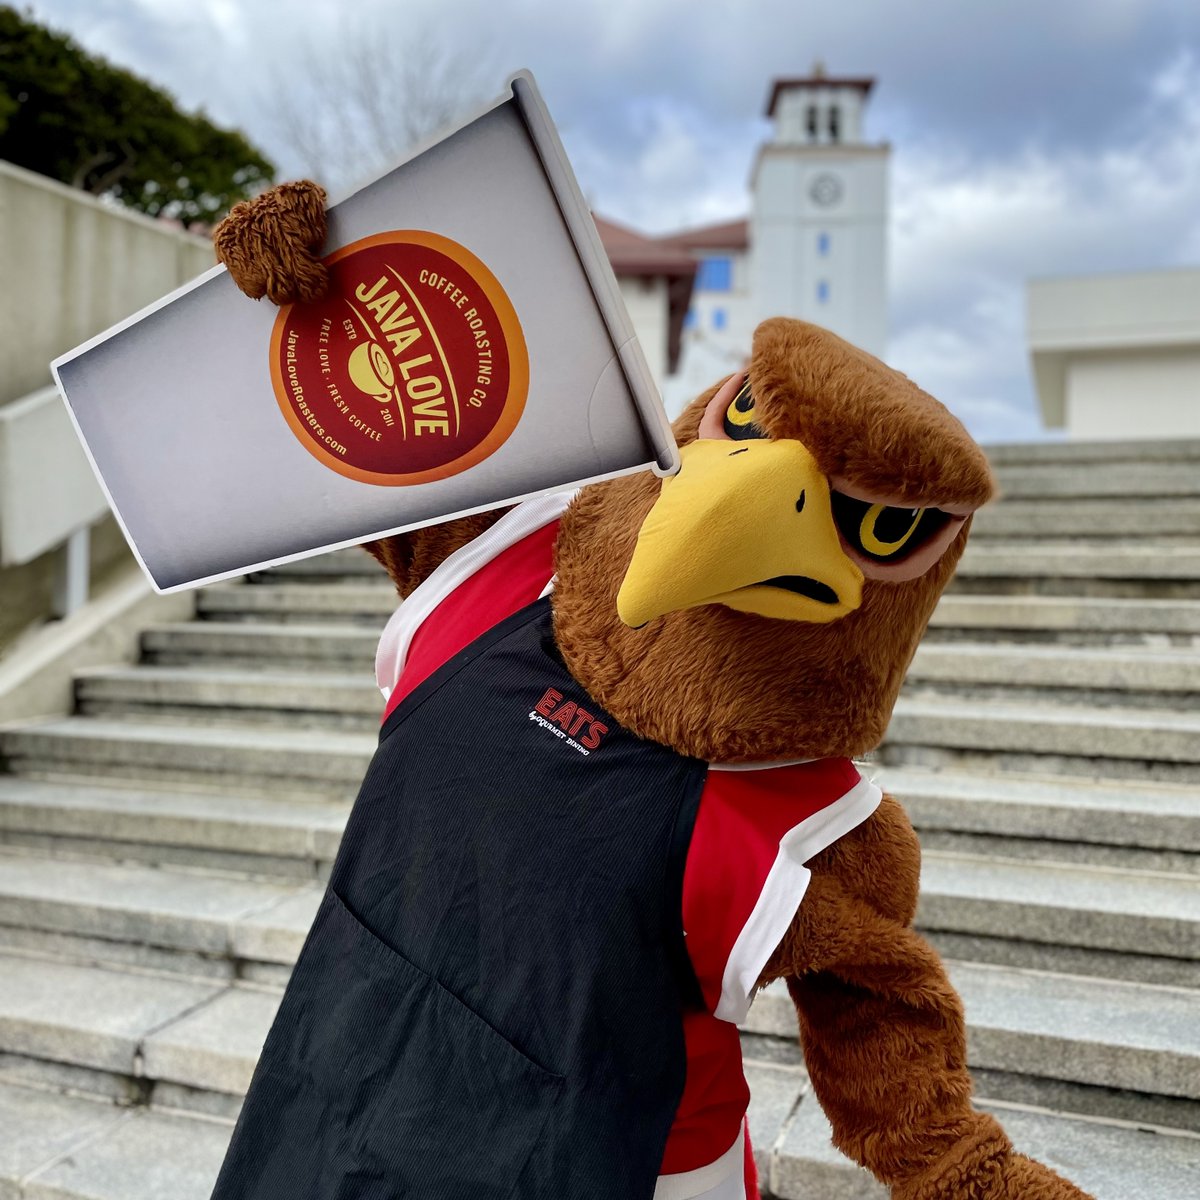 In sponsorship with Java Love Brewing Co. if you give a gift to the University, you’ll receive a $5 coupon for your next order! 🎁 ☕ #DoYouJavaLove @montclairalumni

Tomorrow is #1Day4Montclair, don’t miss out on all the fun! ➡️ brnw.ch/21wJ8tn